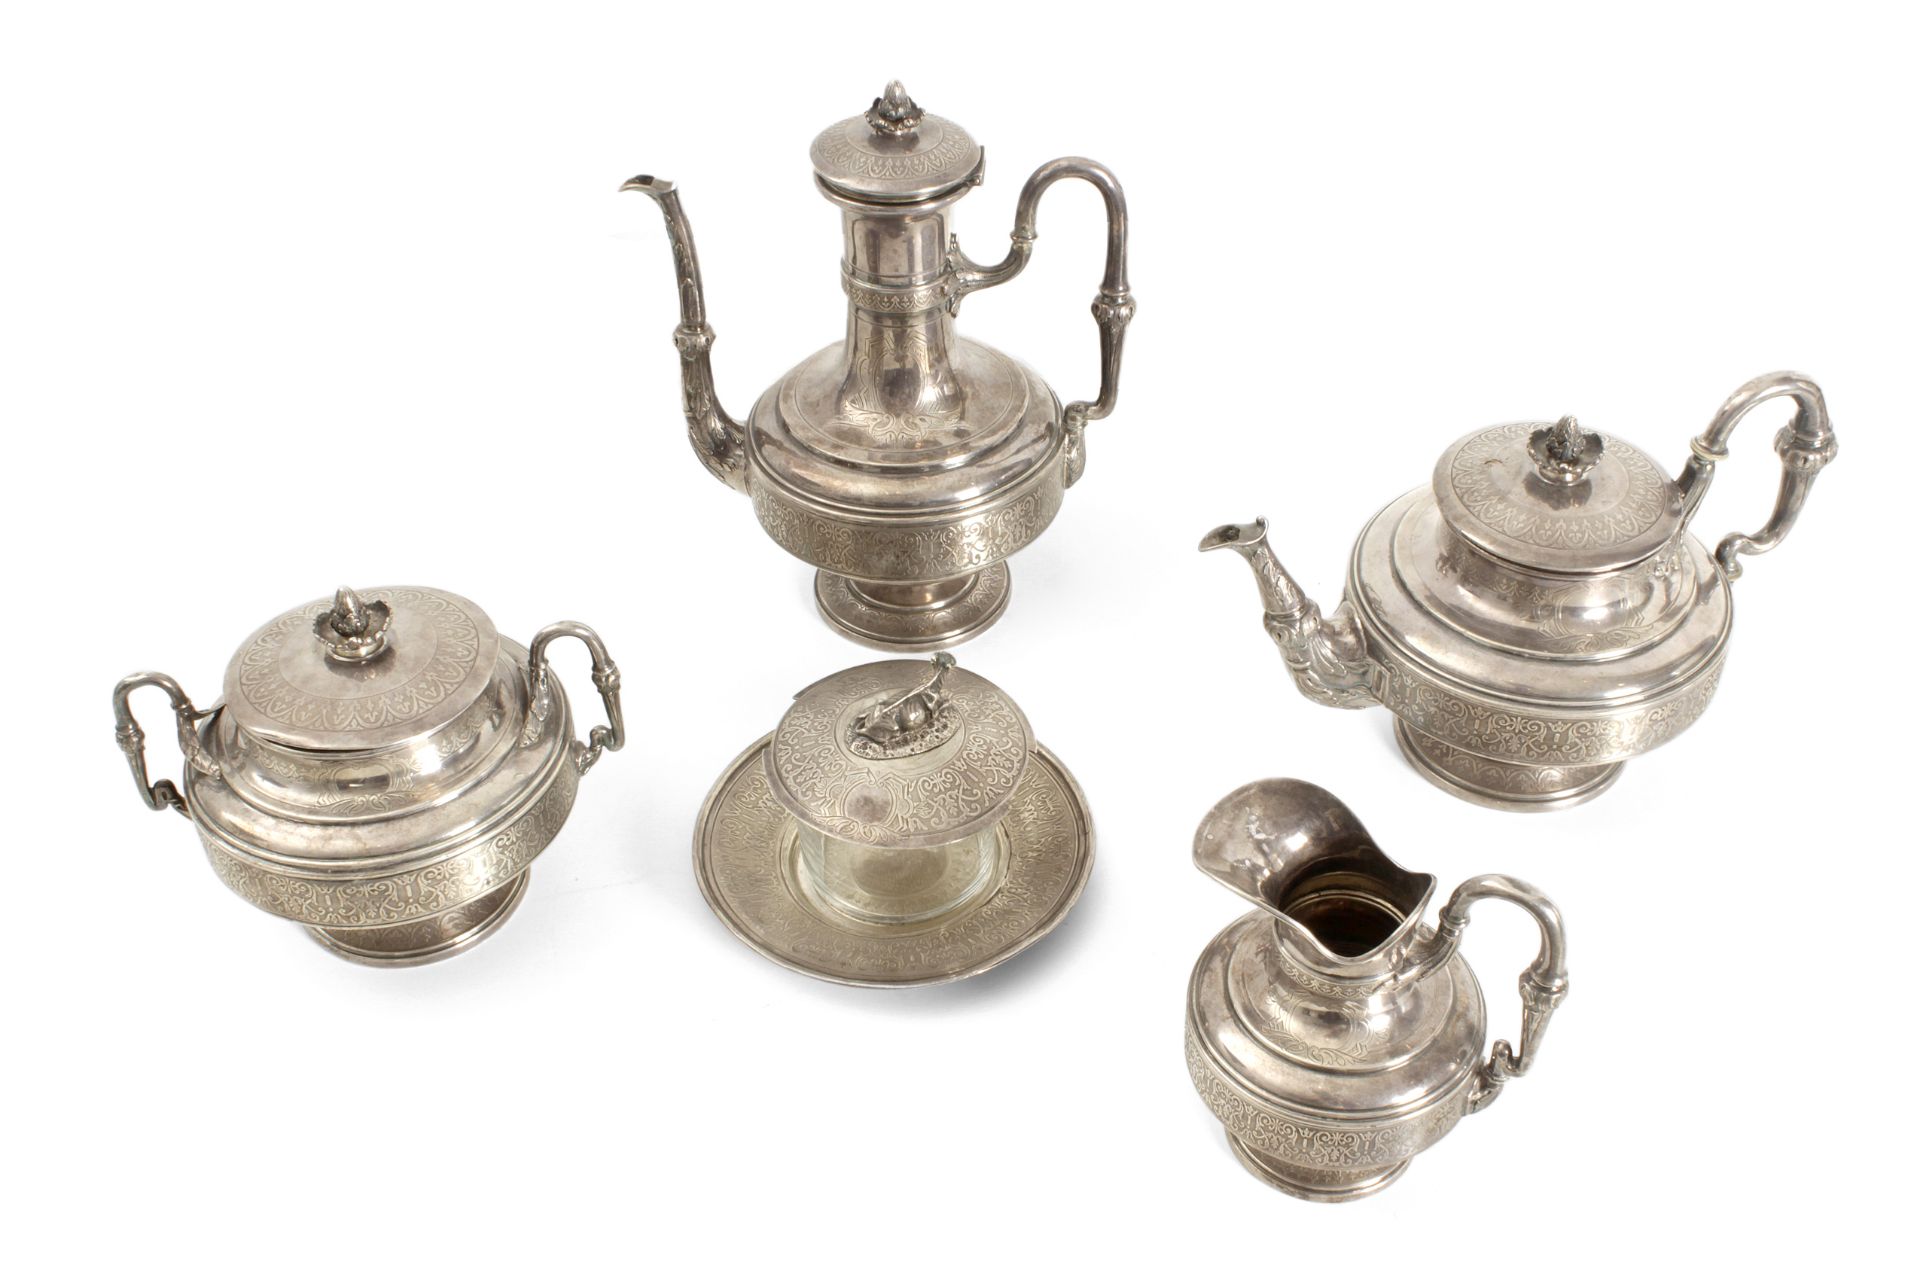 A 19th century French silver coffee set